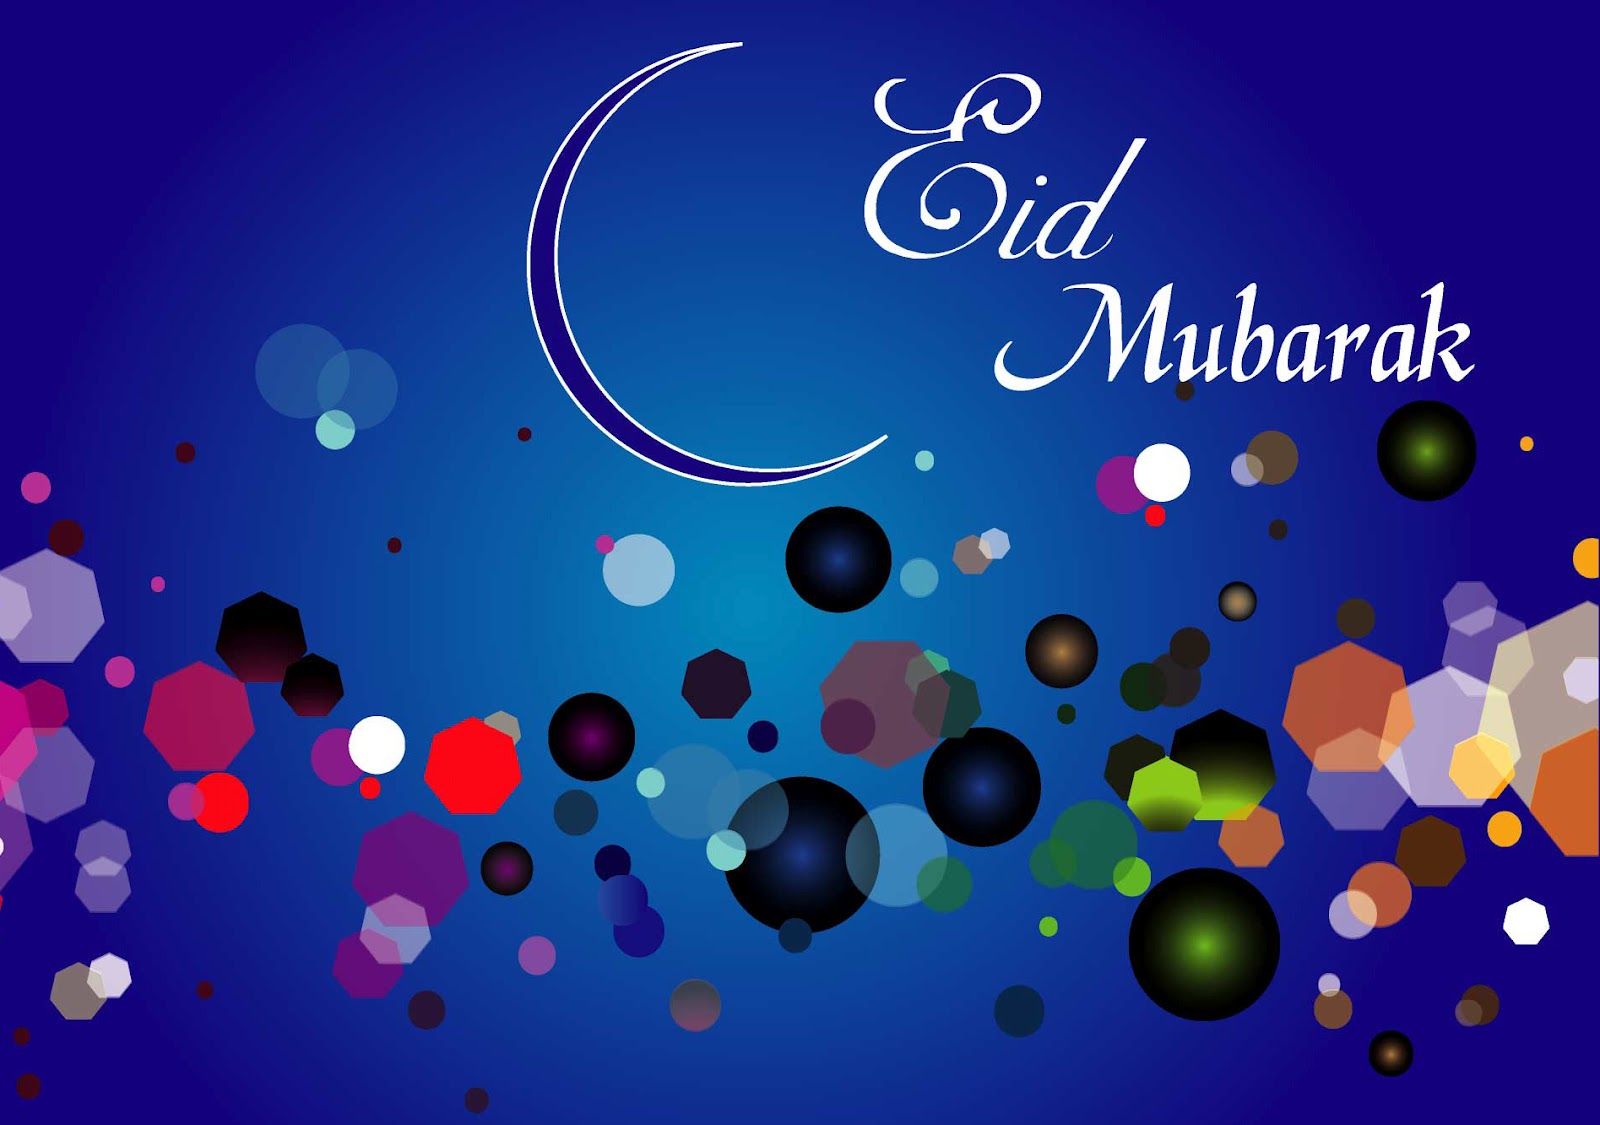 Eid Al Fitr 2020 Image, Wishes, Quotes, Greetings, Messages And Whatsapp Status